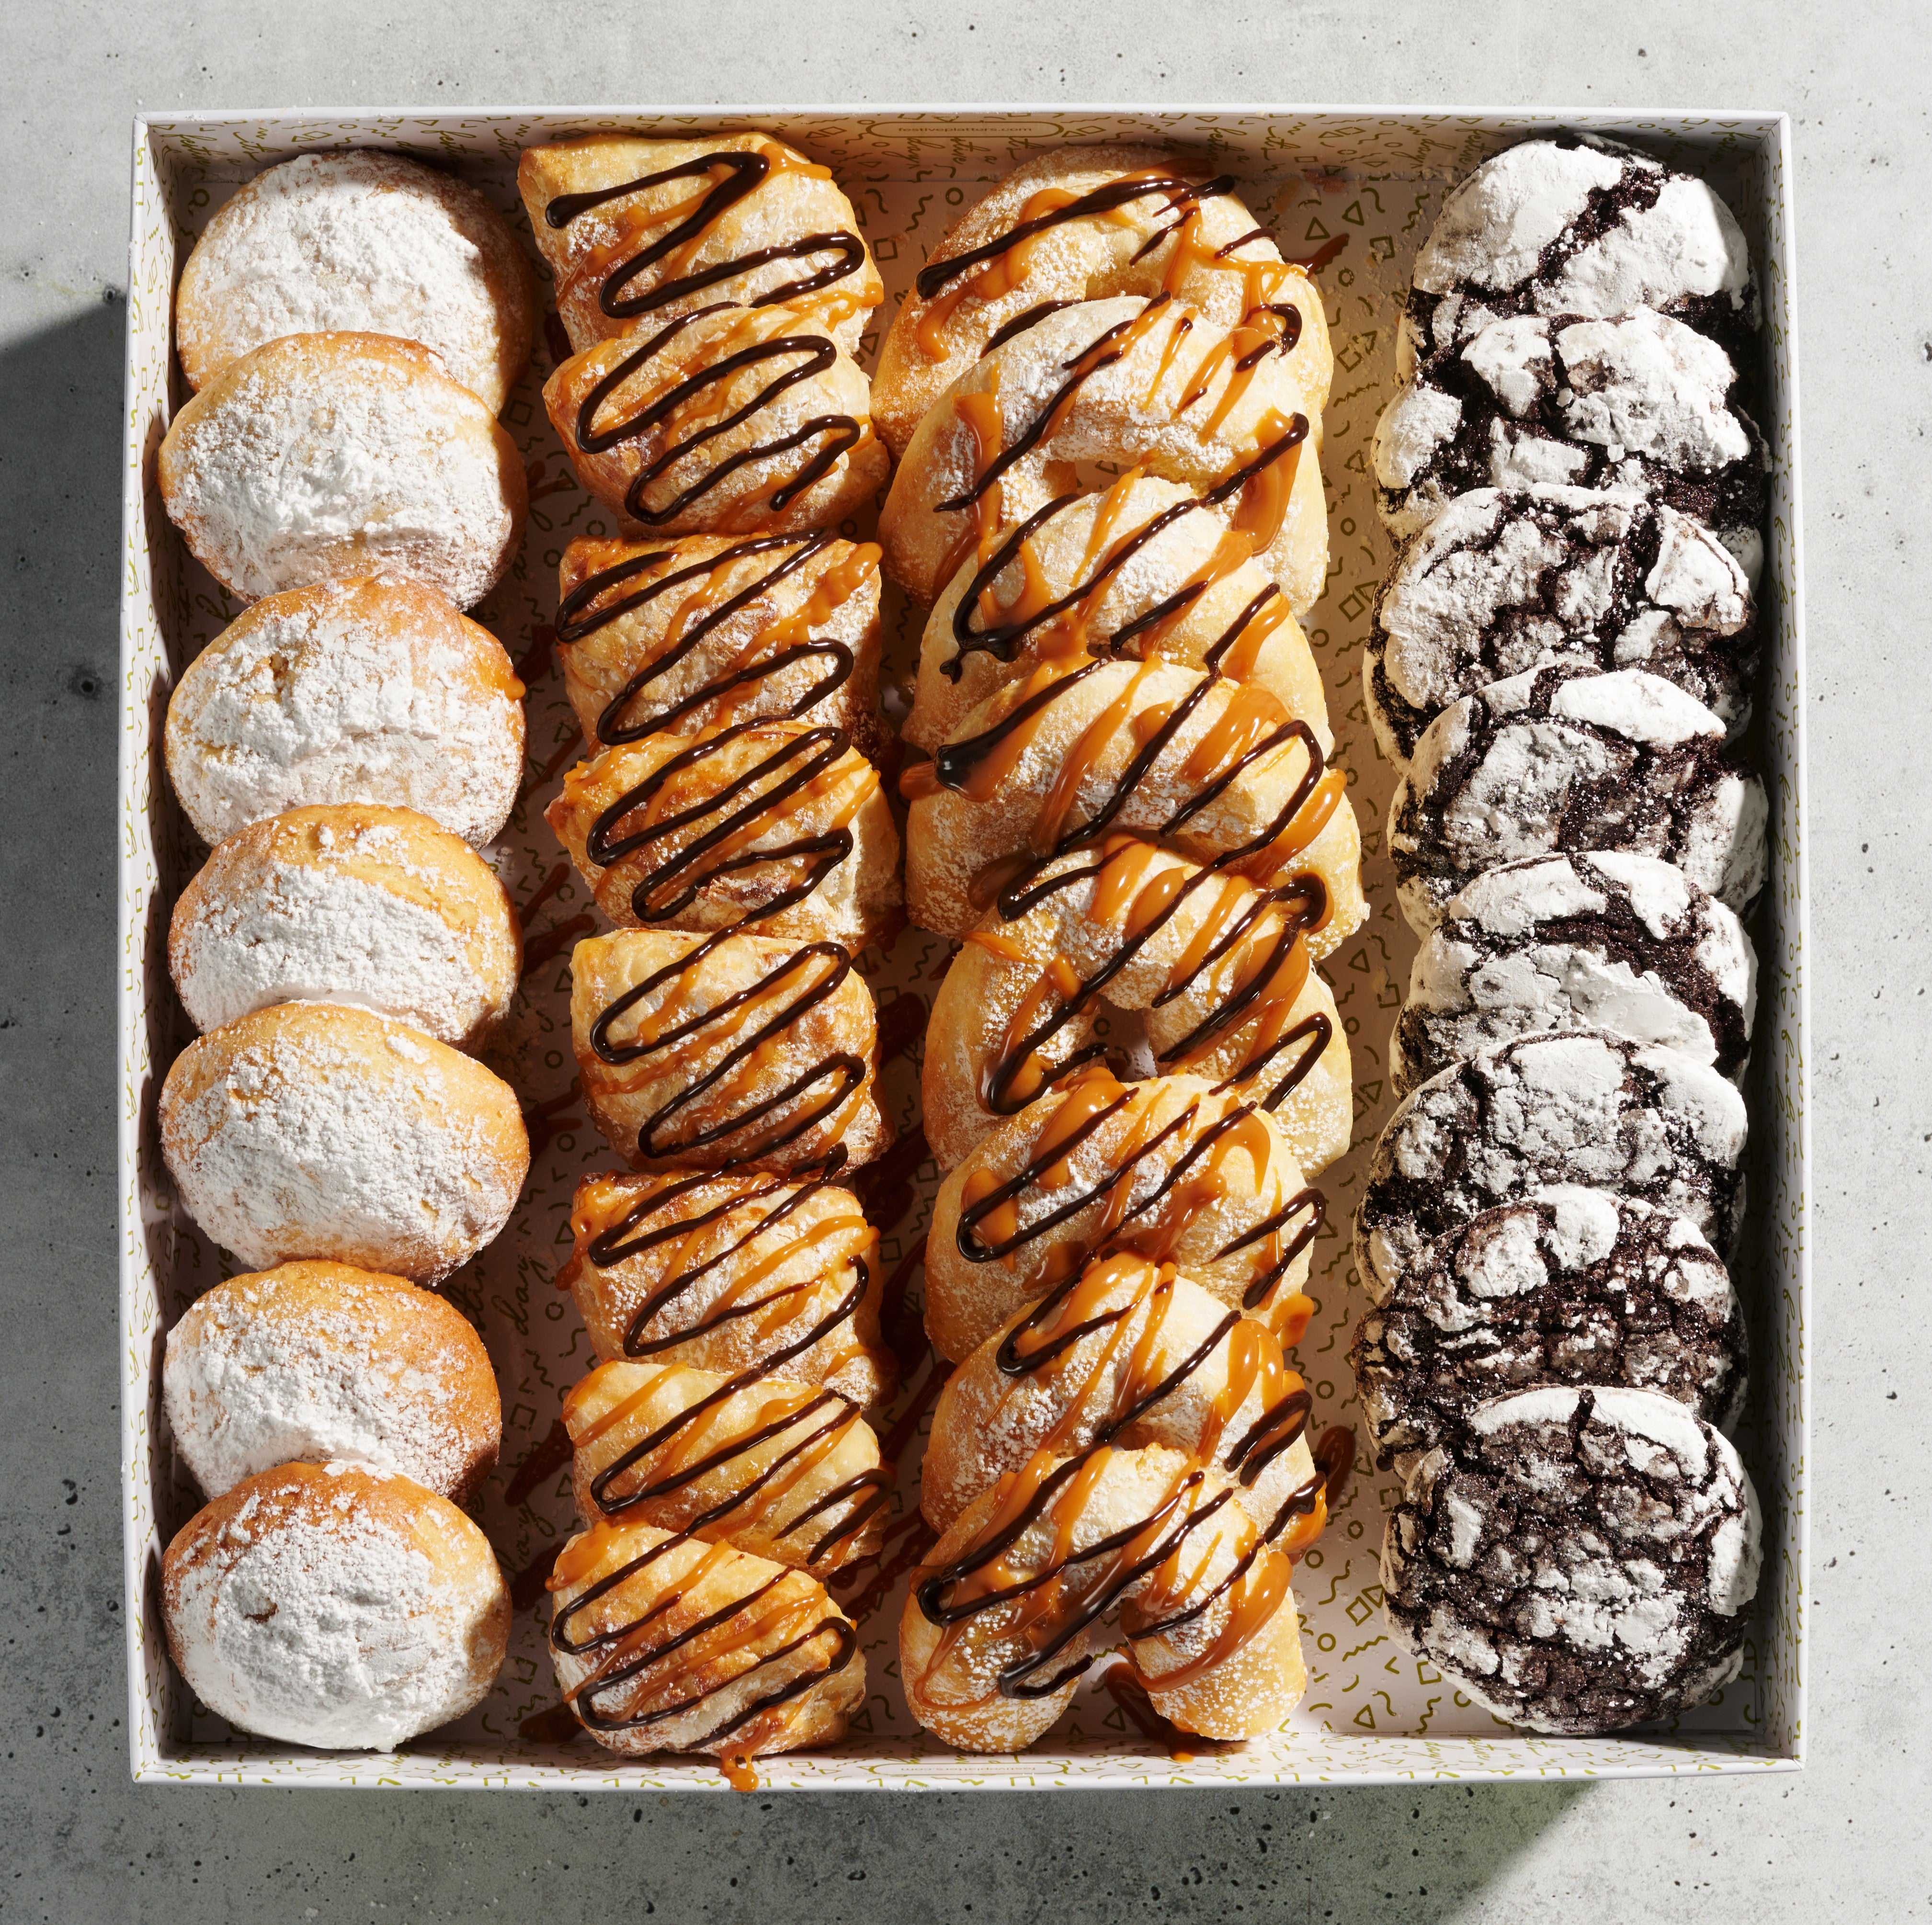 Melt-in-Your-Mouth Pastries Platter